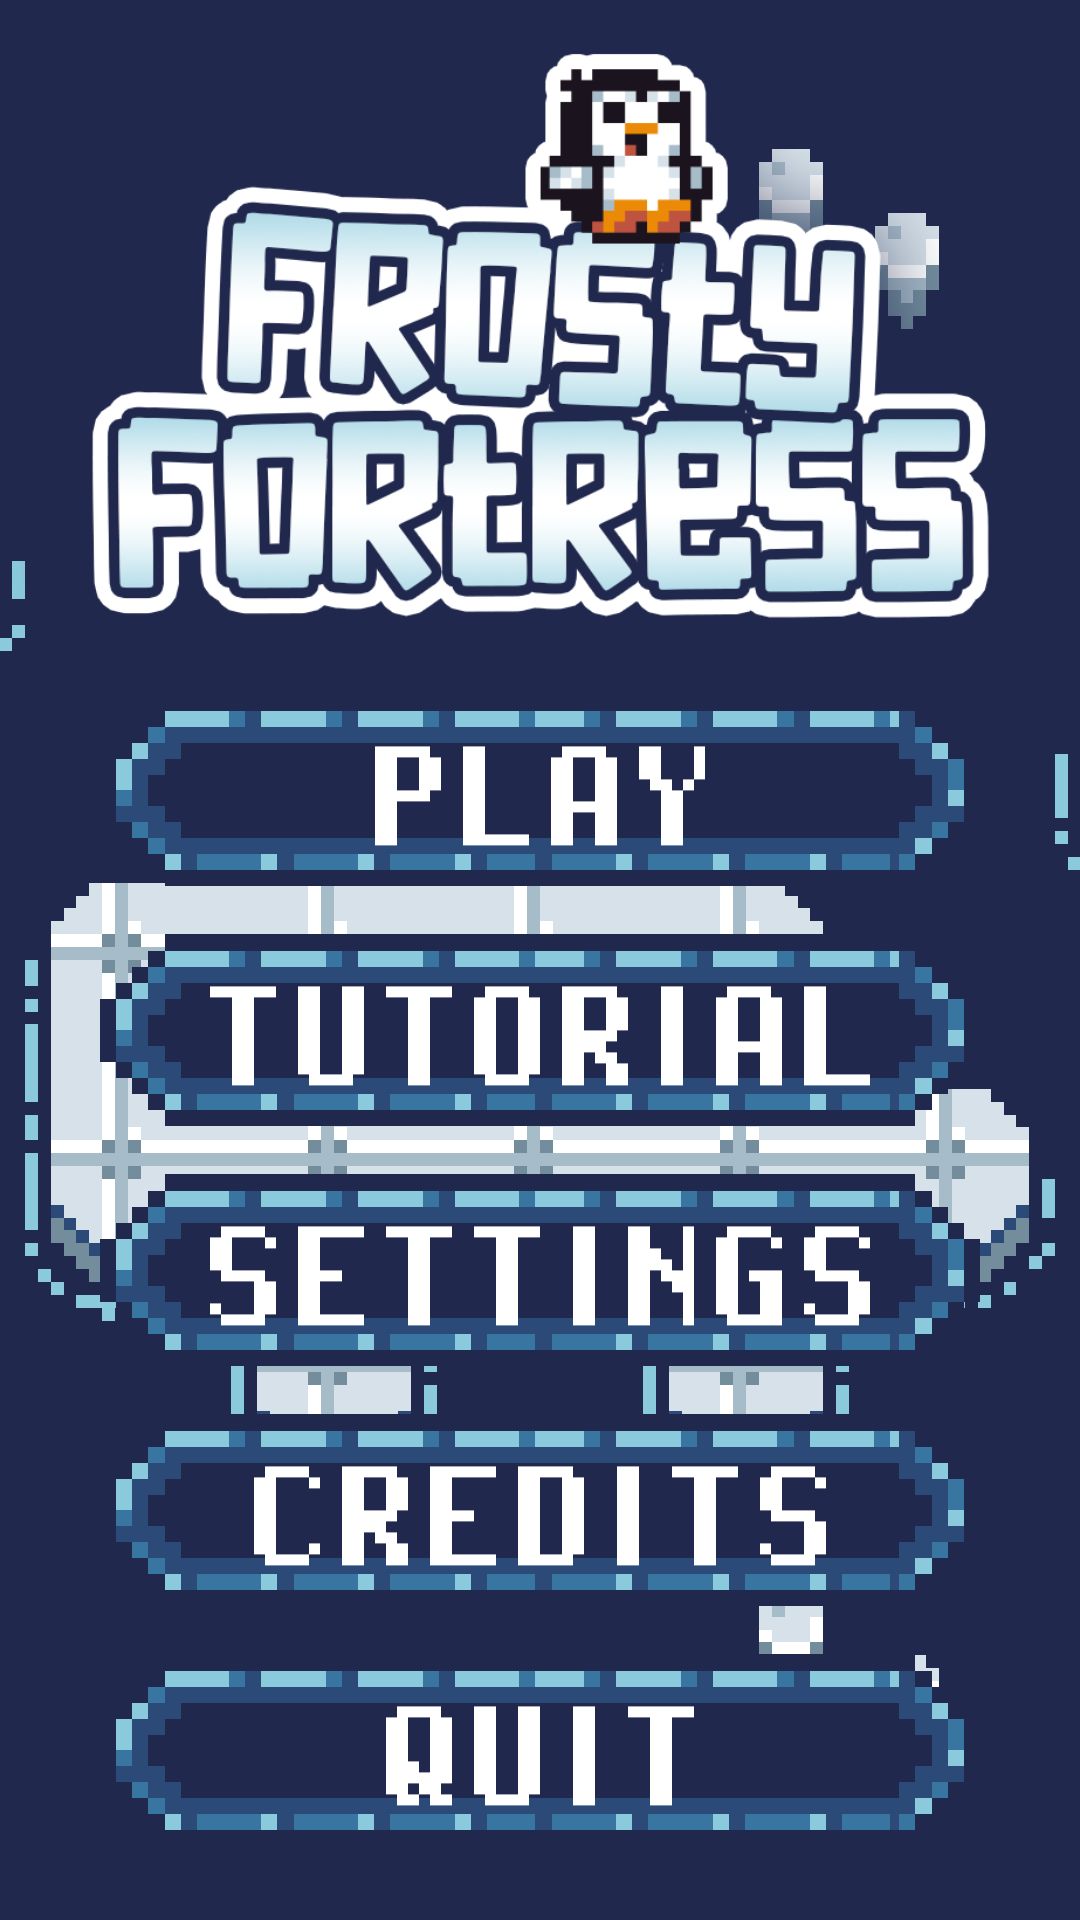 Scarica Frosty Fortress gratis per Android.